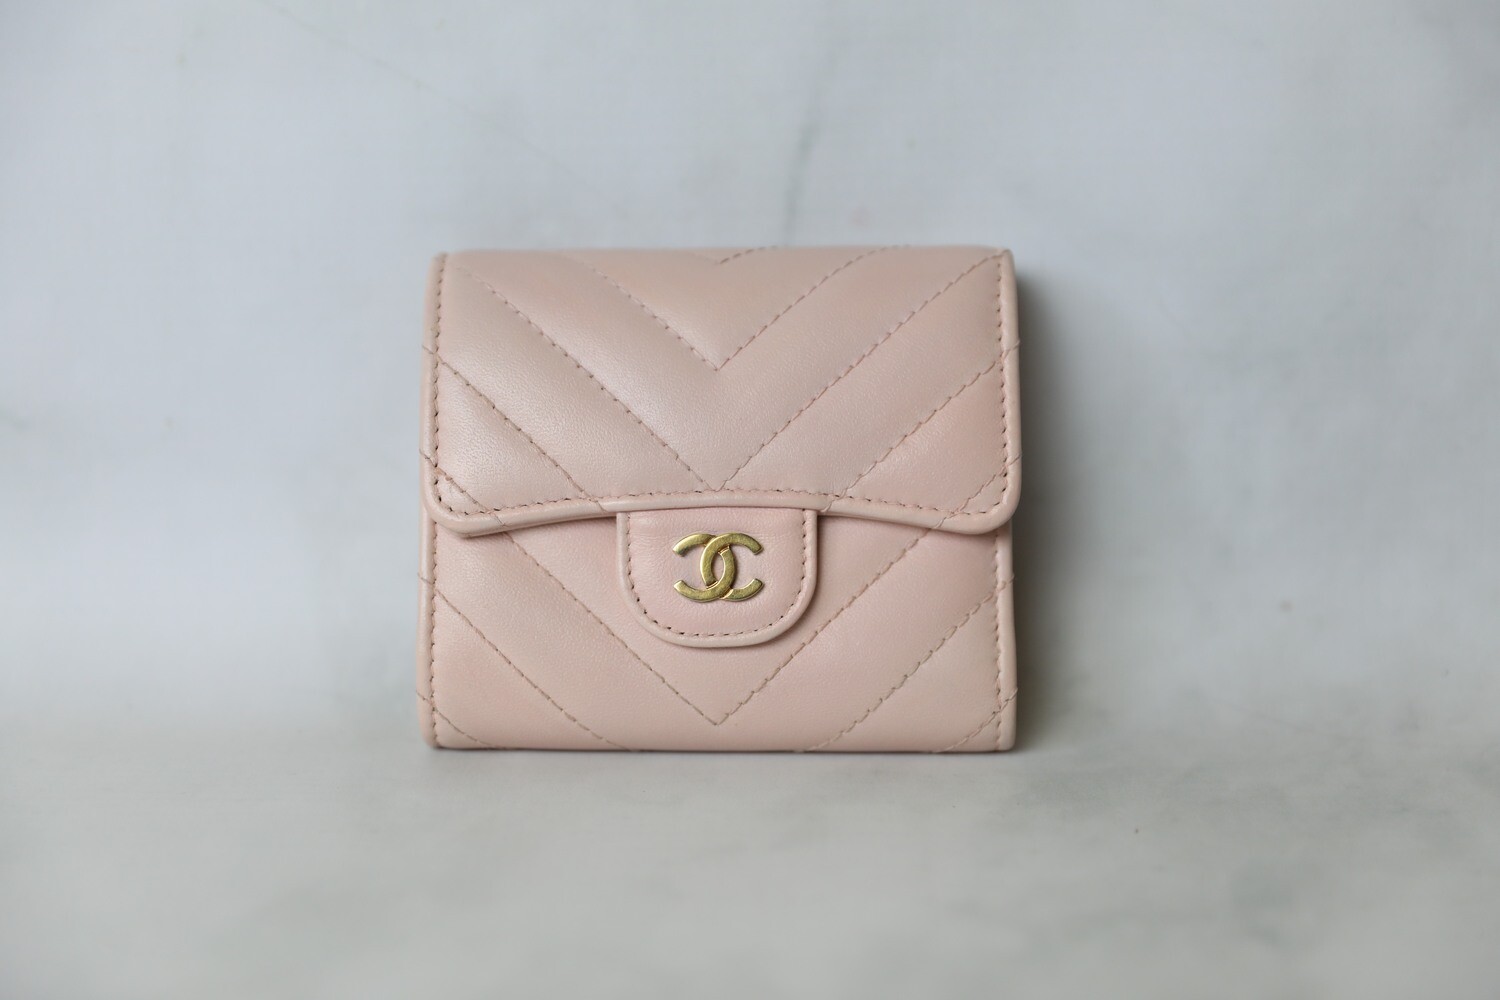 Chanel SLG Snap Wallet, Pink Calfskin with Gold Hardware, Preowned in Box WA001